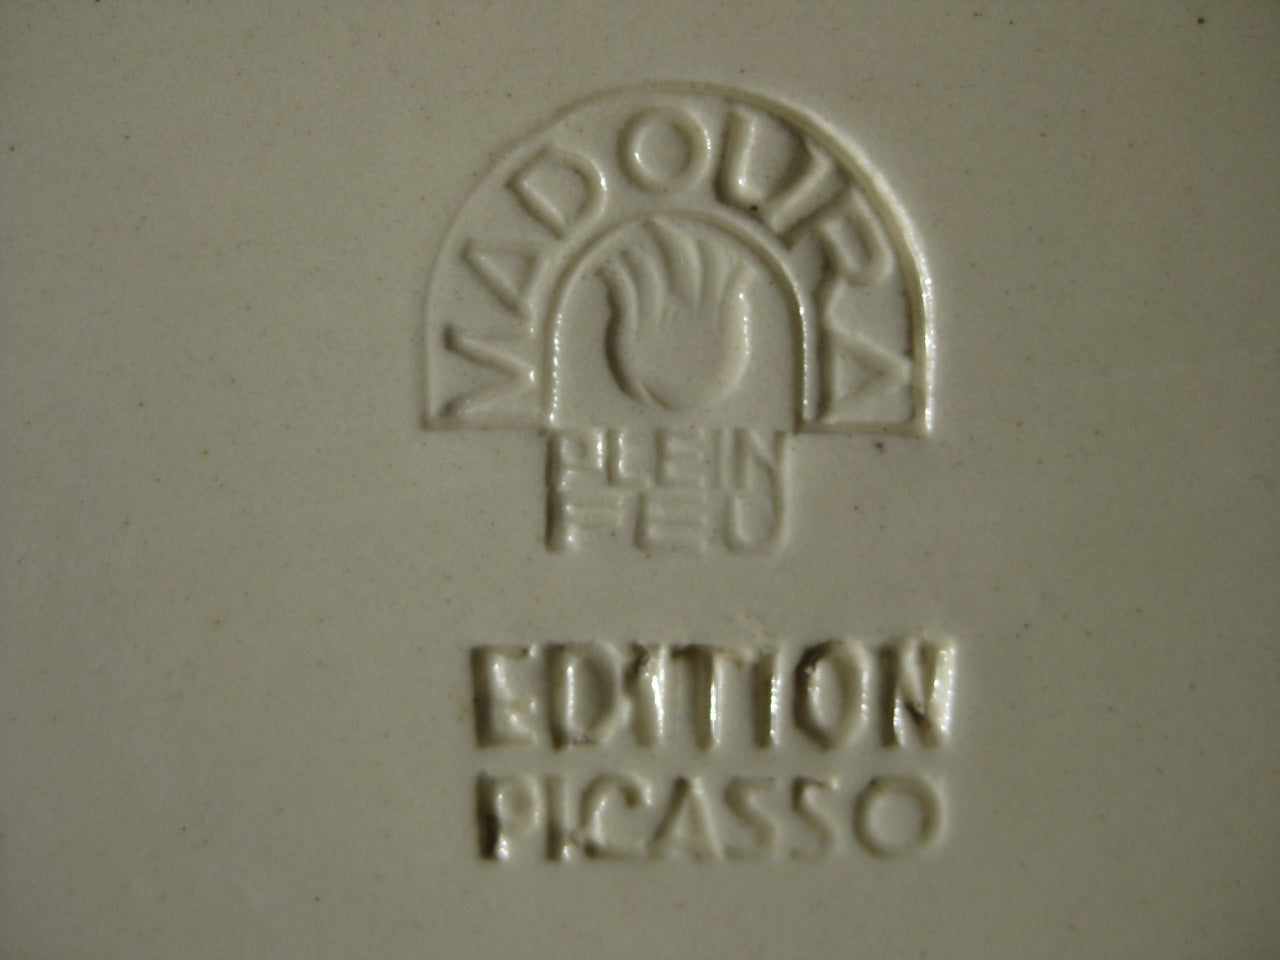 Pablo Picasso (Spanish, 1881–1973) 
Mat Owl, 1955
Ceramic Edition
15.4 ? 12.6 in. cm.
 Madoura stamp.
Edition 450
Foundry/Publisher Ed. Picasso, Madoura plein feu ed.